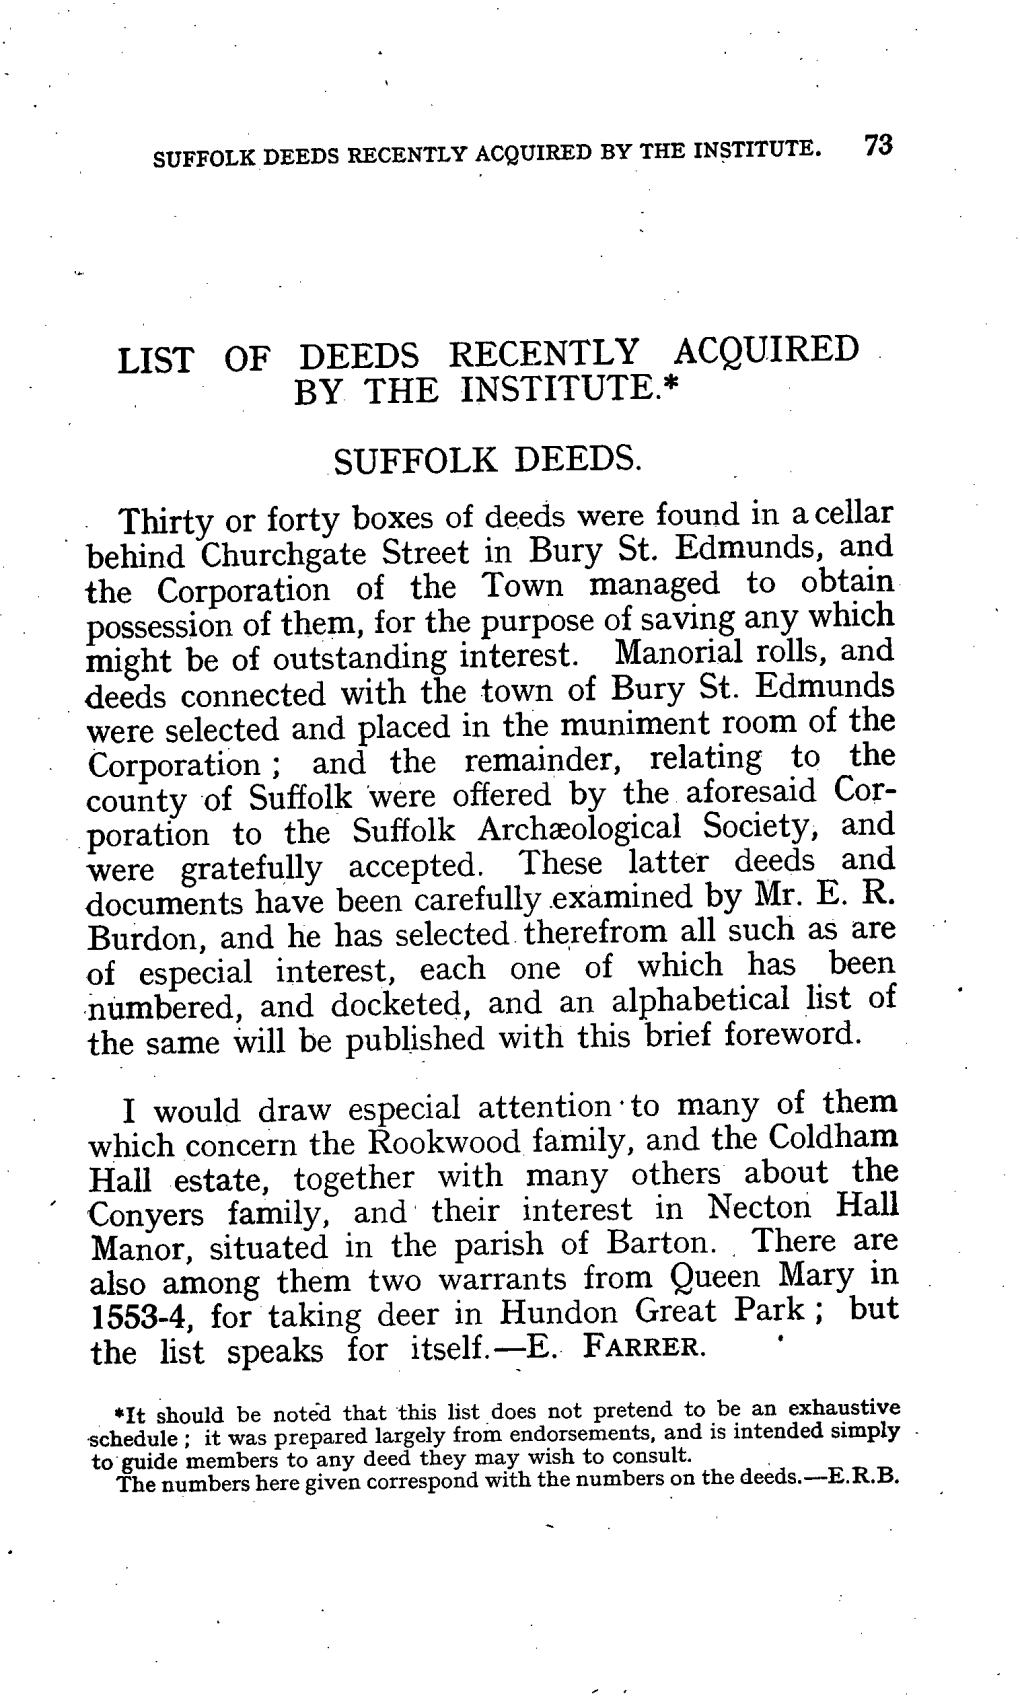 List of Deeds Recently Acquired by the Institute E. Farrer